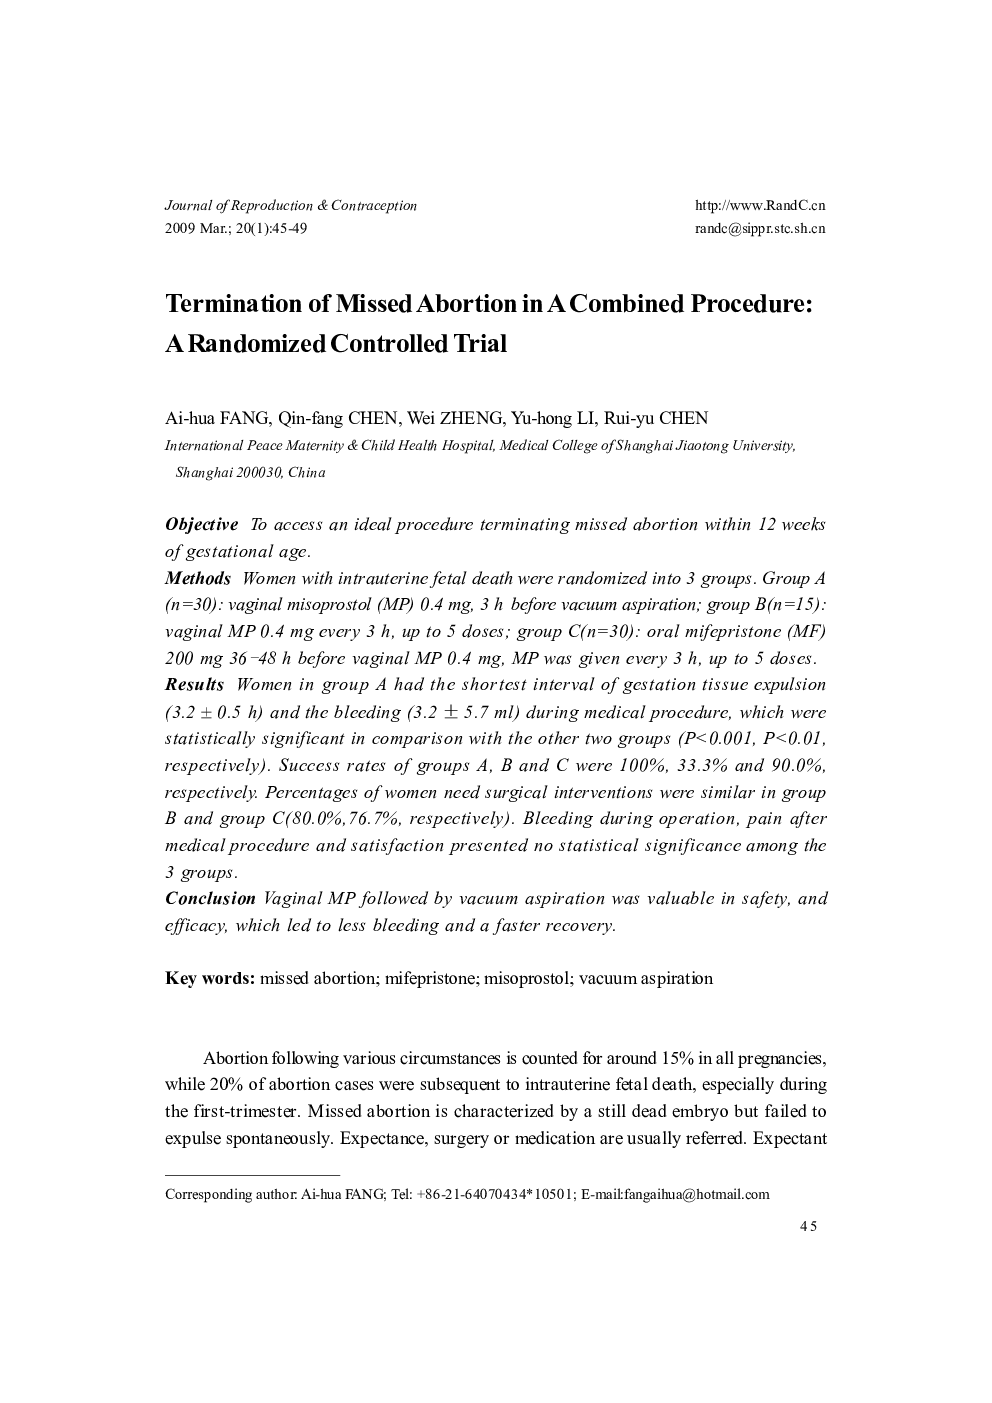 Termination of Missed Abortion in A Combined Procedure: A Randomized Controlled Trial